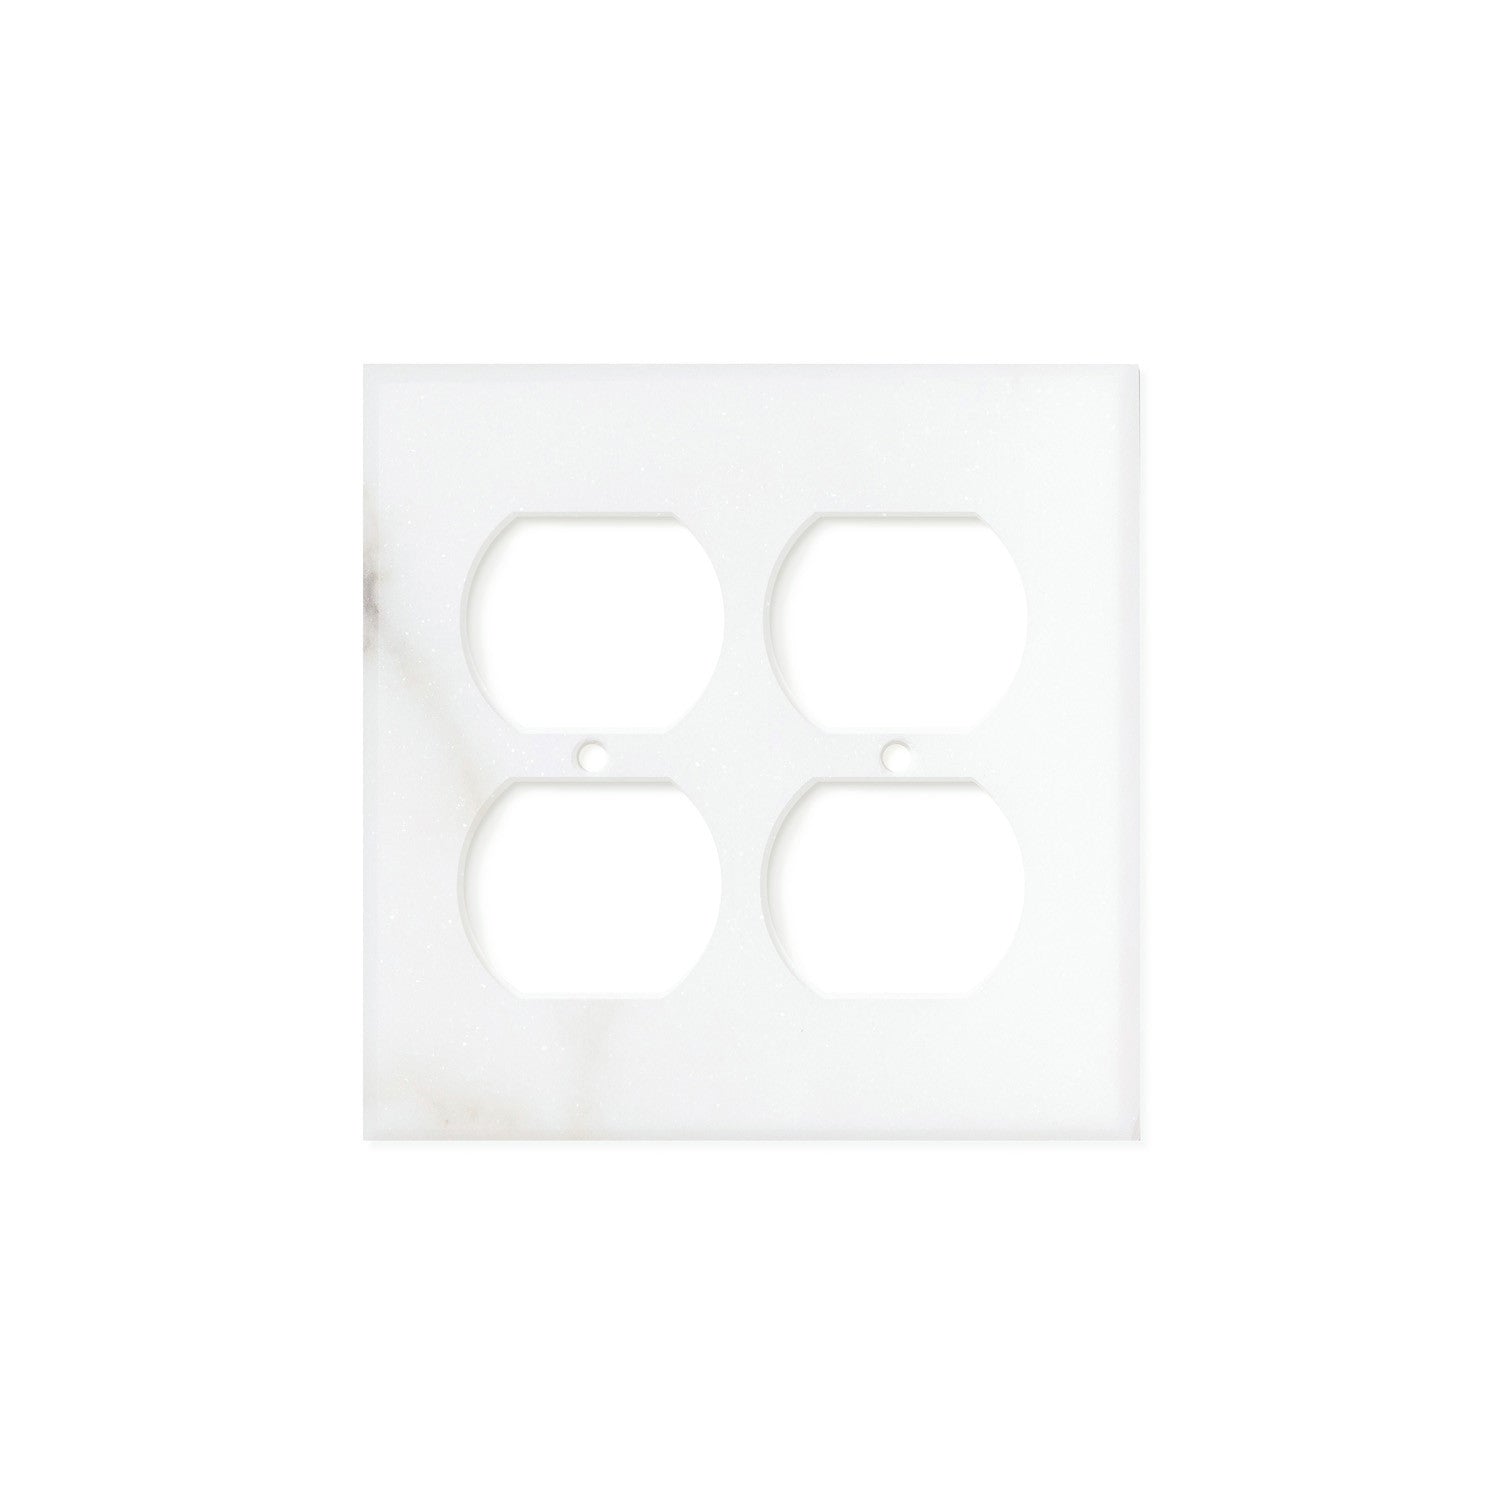 Calacatta Gold Marble Switch Plate Cover, Honed (2 DUPLEX) - Tilephile